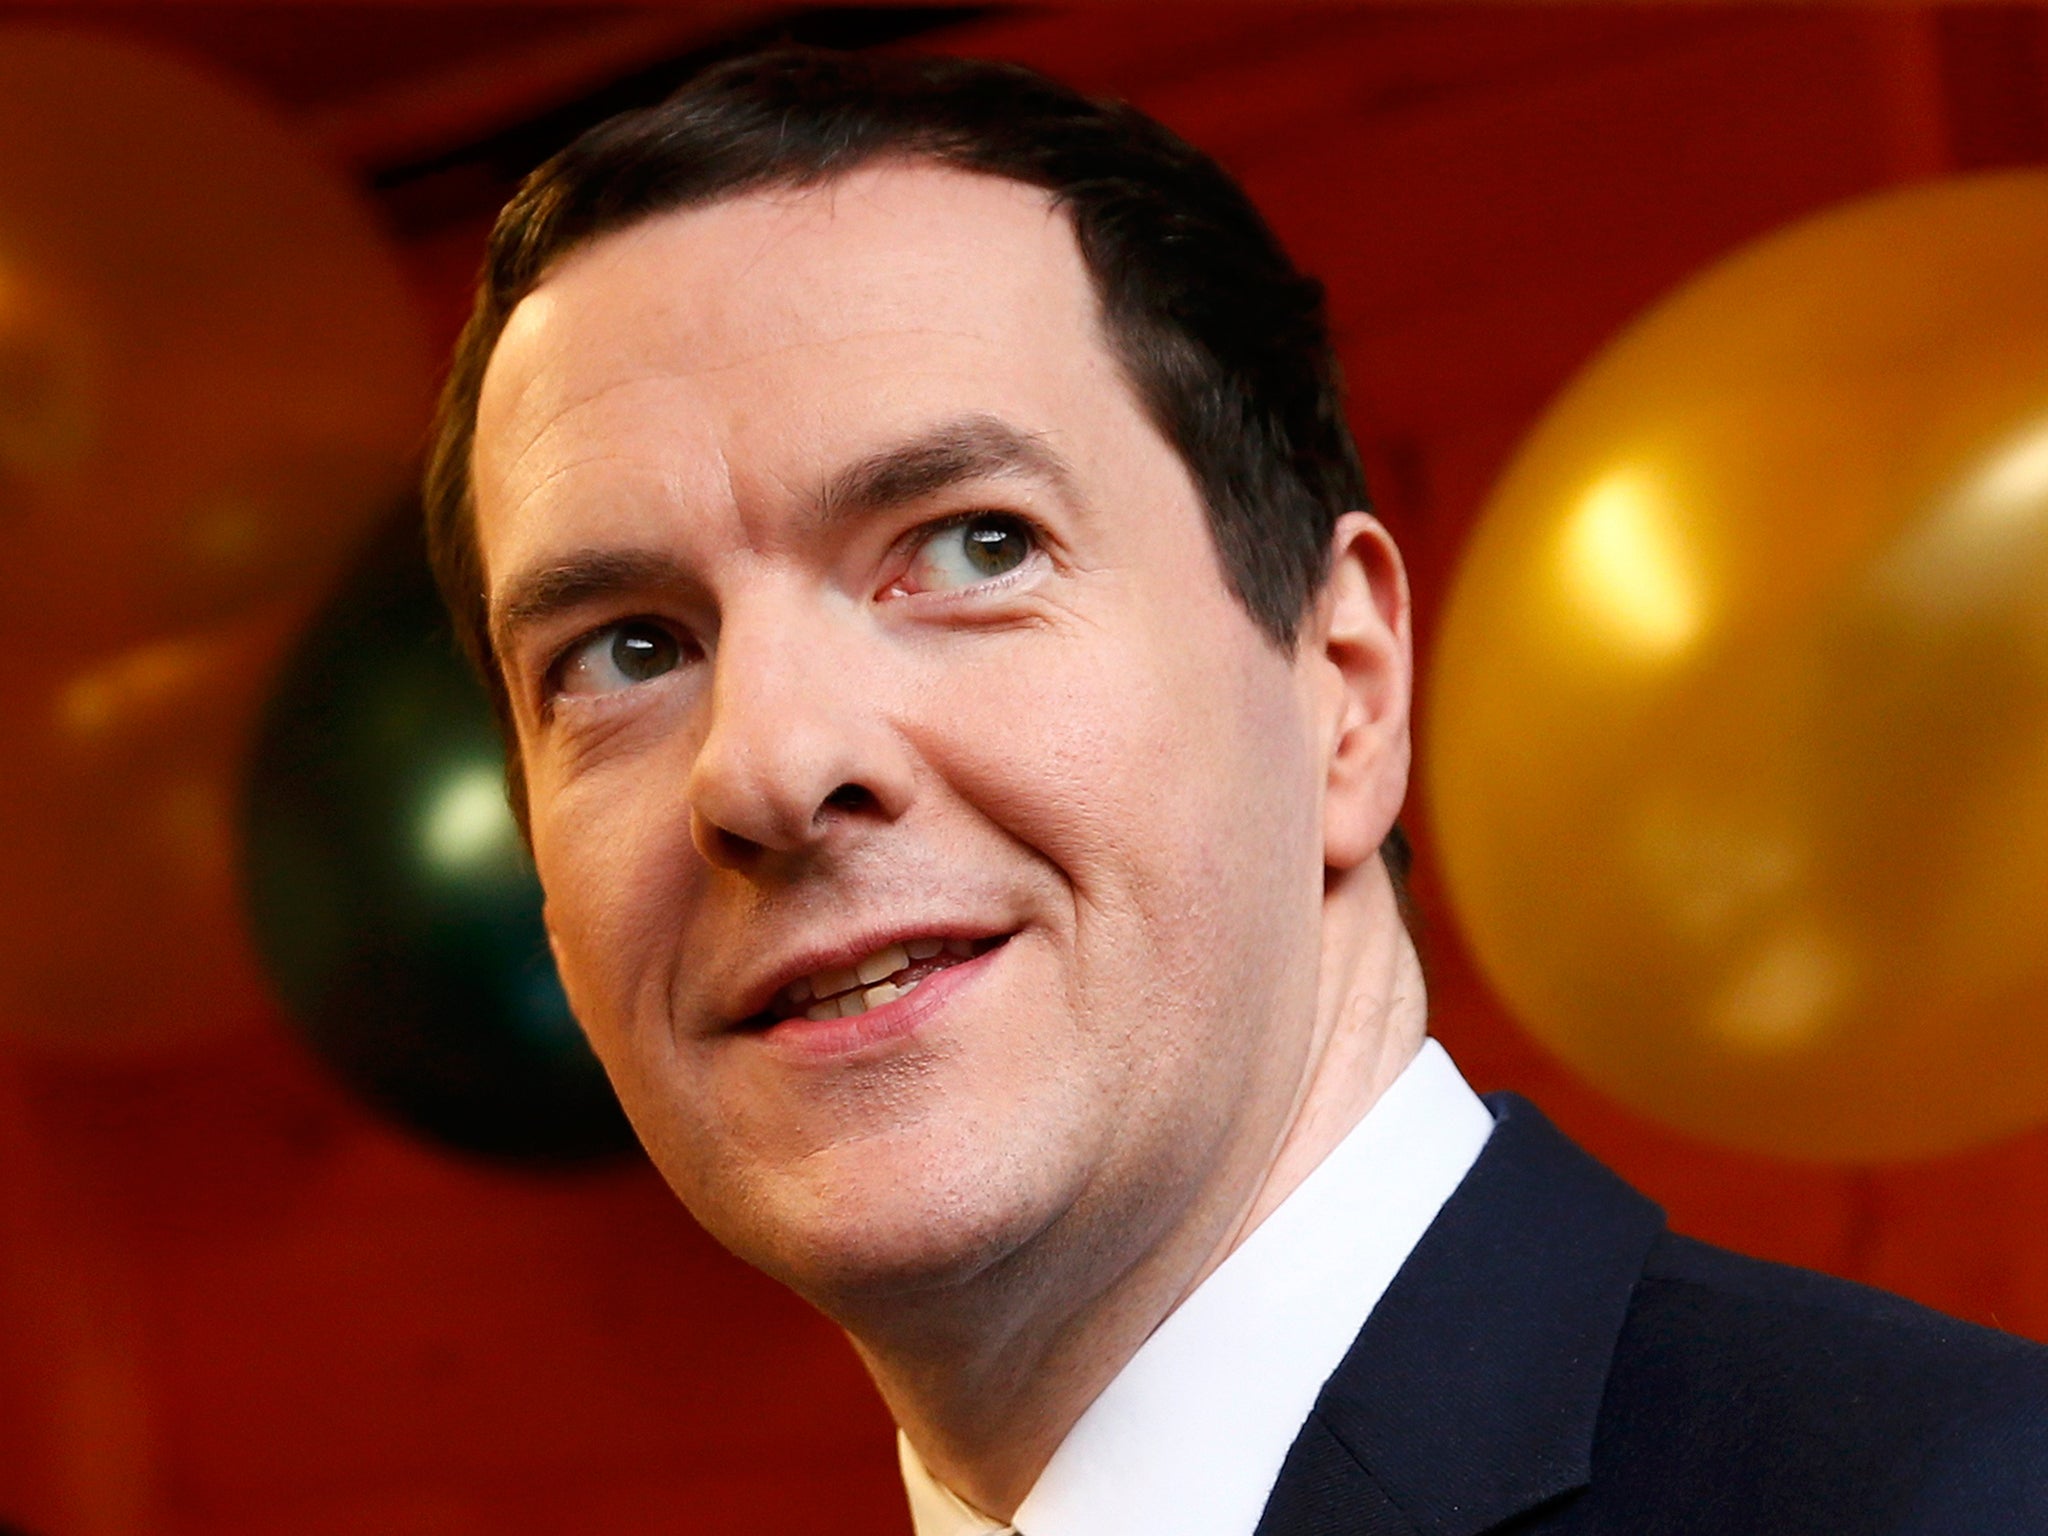 The £130 million HMRC deal on back taxes was hailed as a 'victory' by Mr Osborne